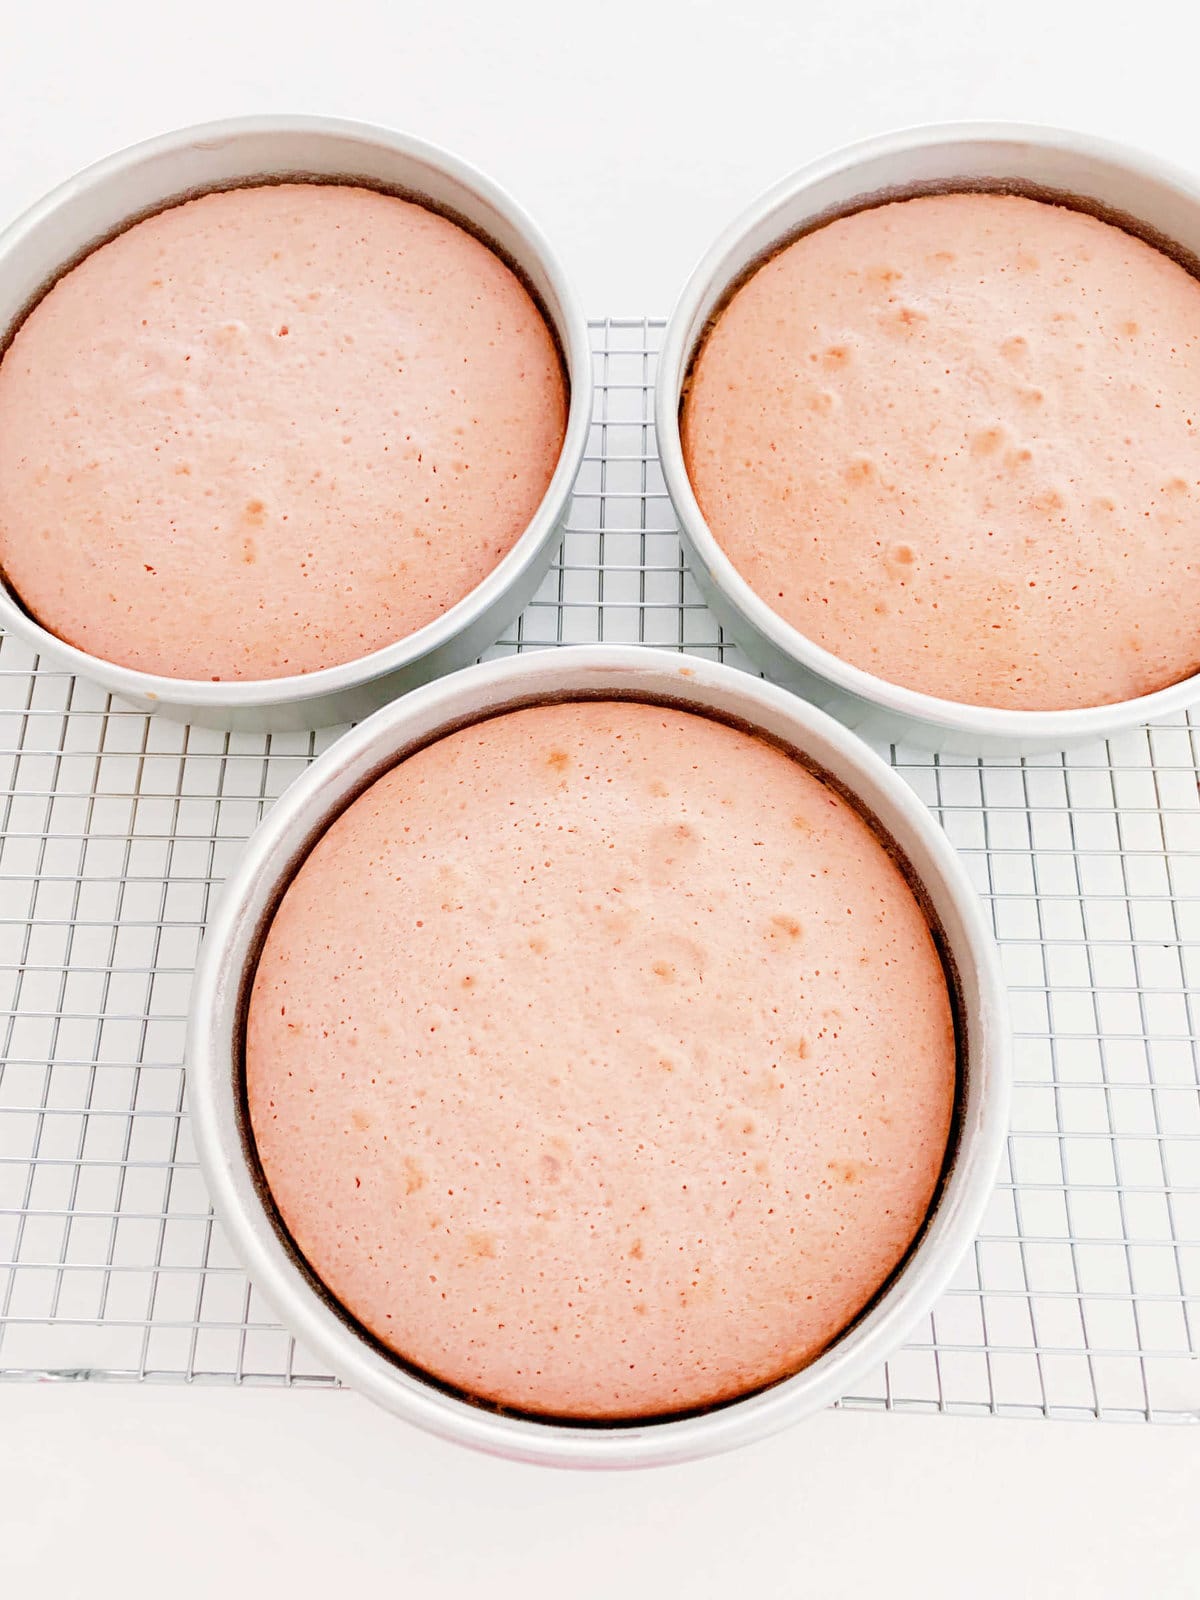 Three freshly baked cake layers, in pans